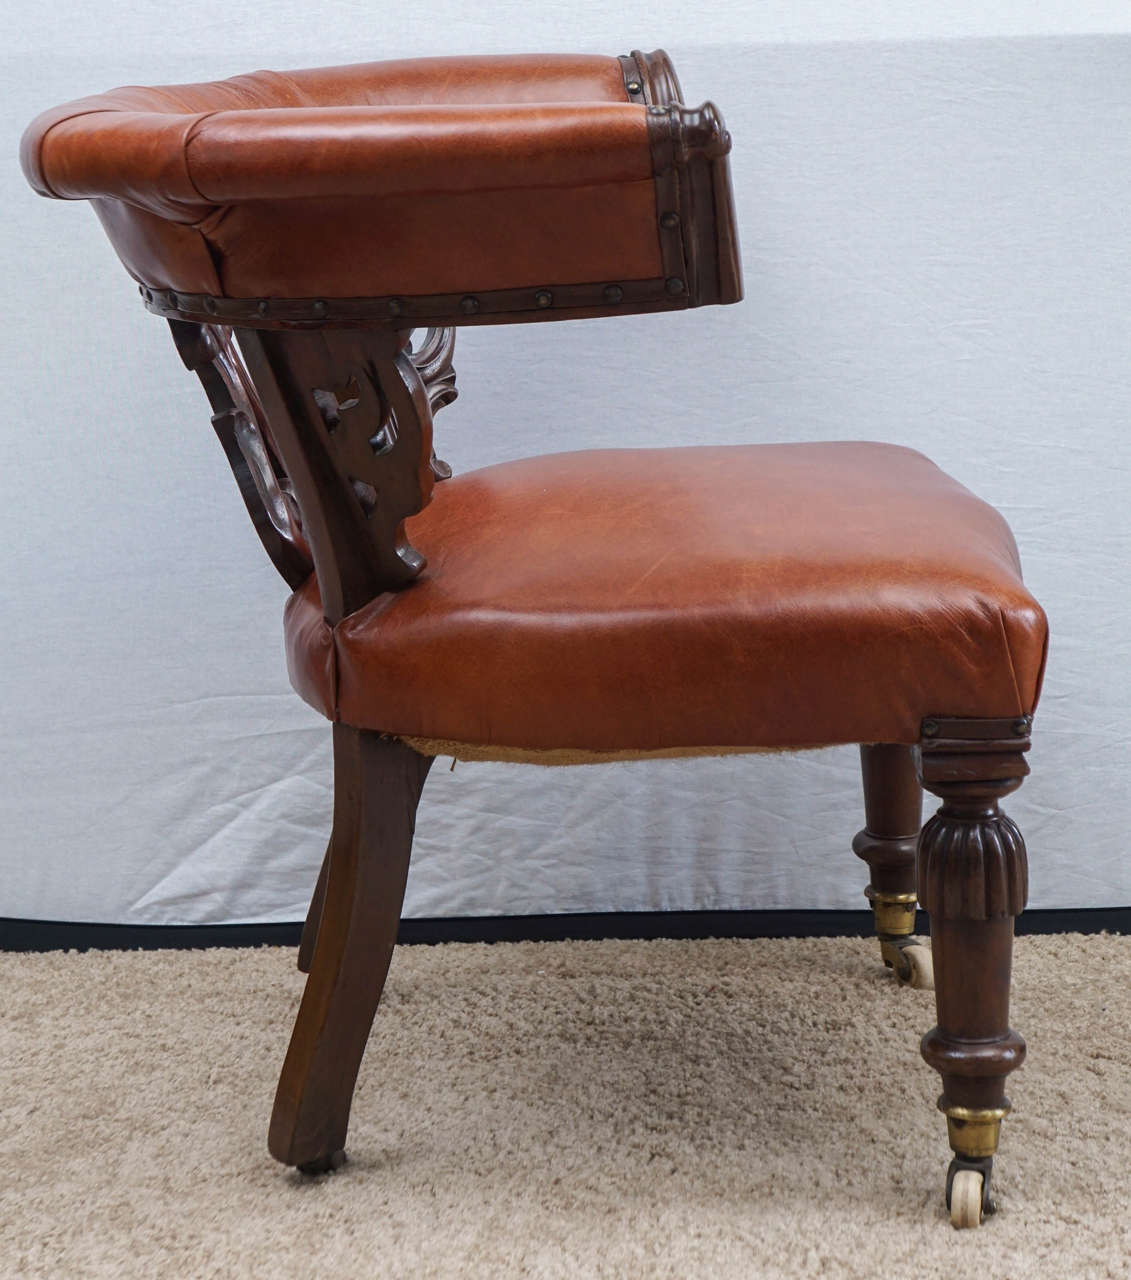 British Mid-19th Century English Leather Chair on Casters For Sale